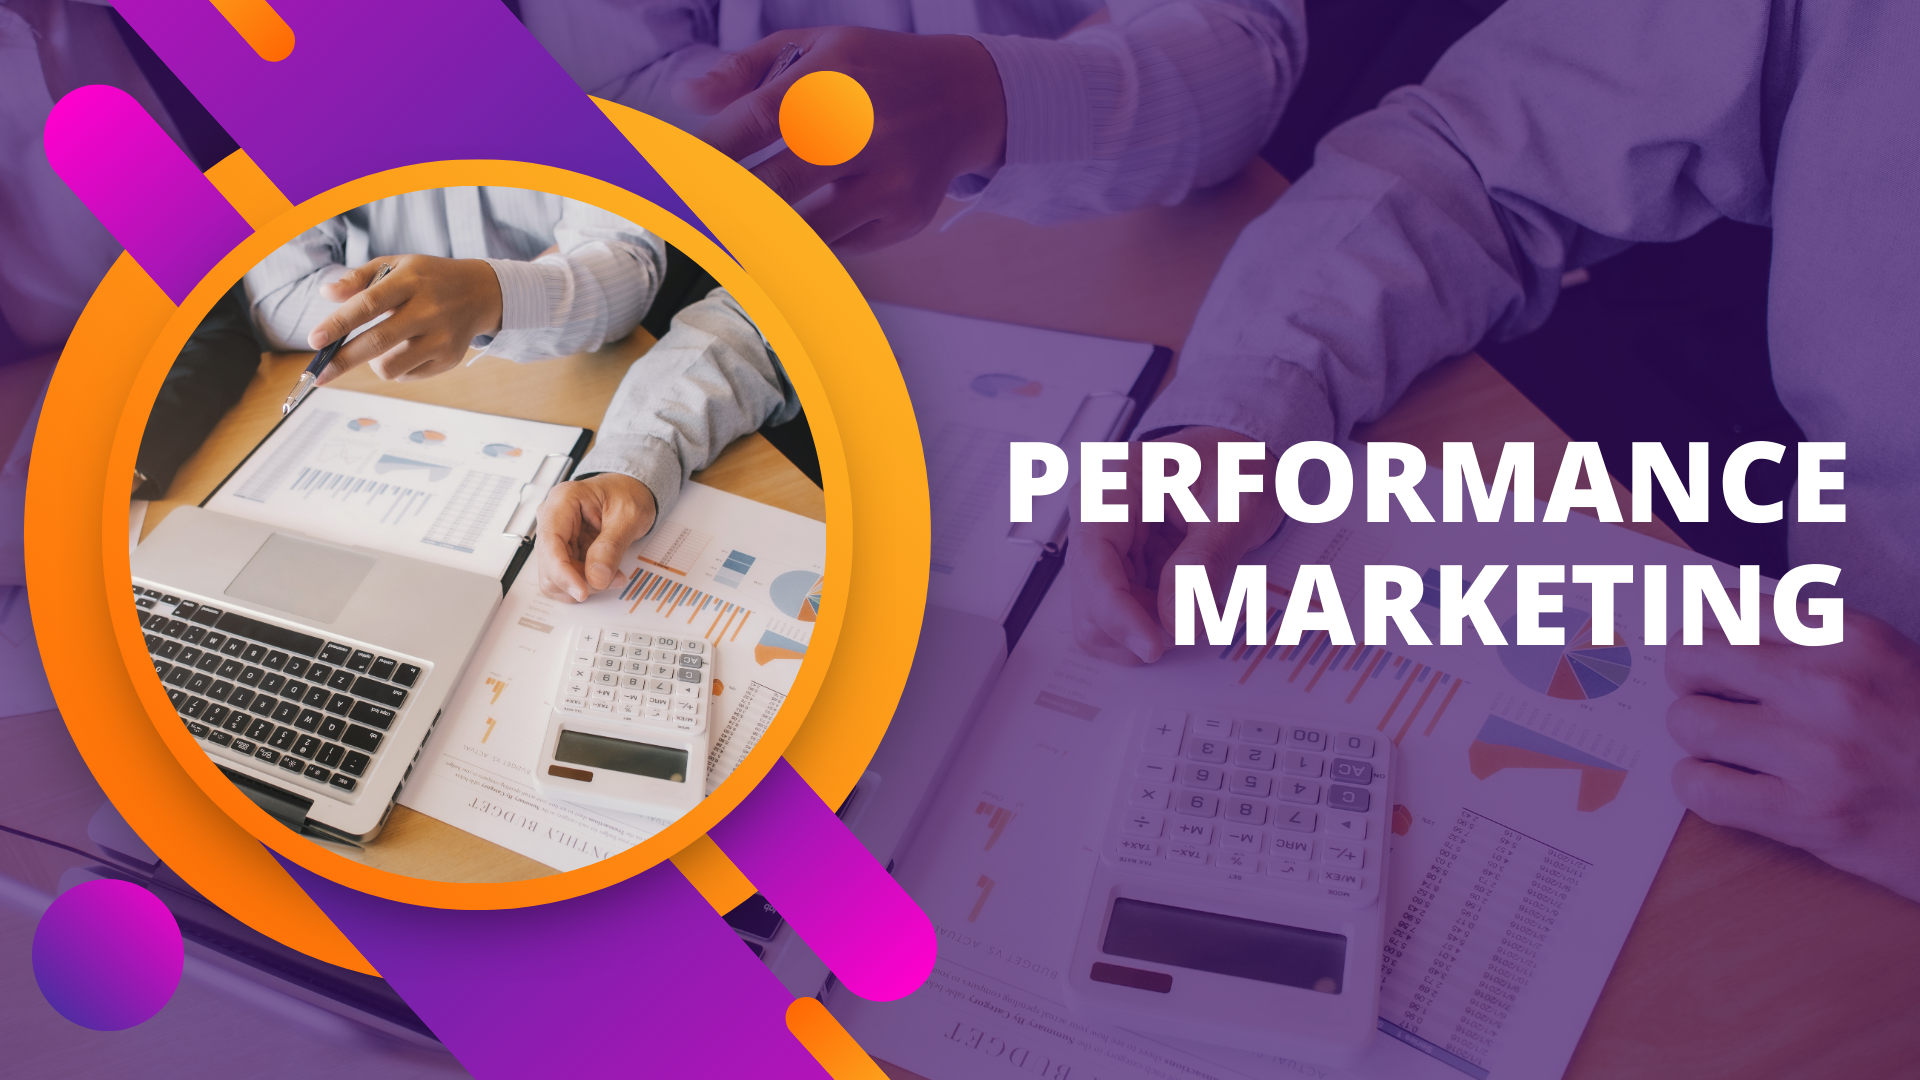 Why a business needs performance marketing agency?